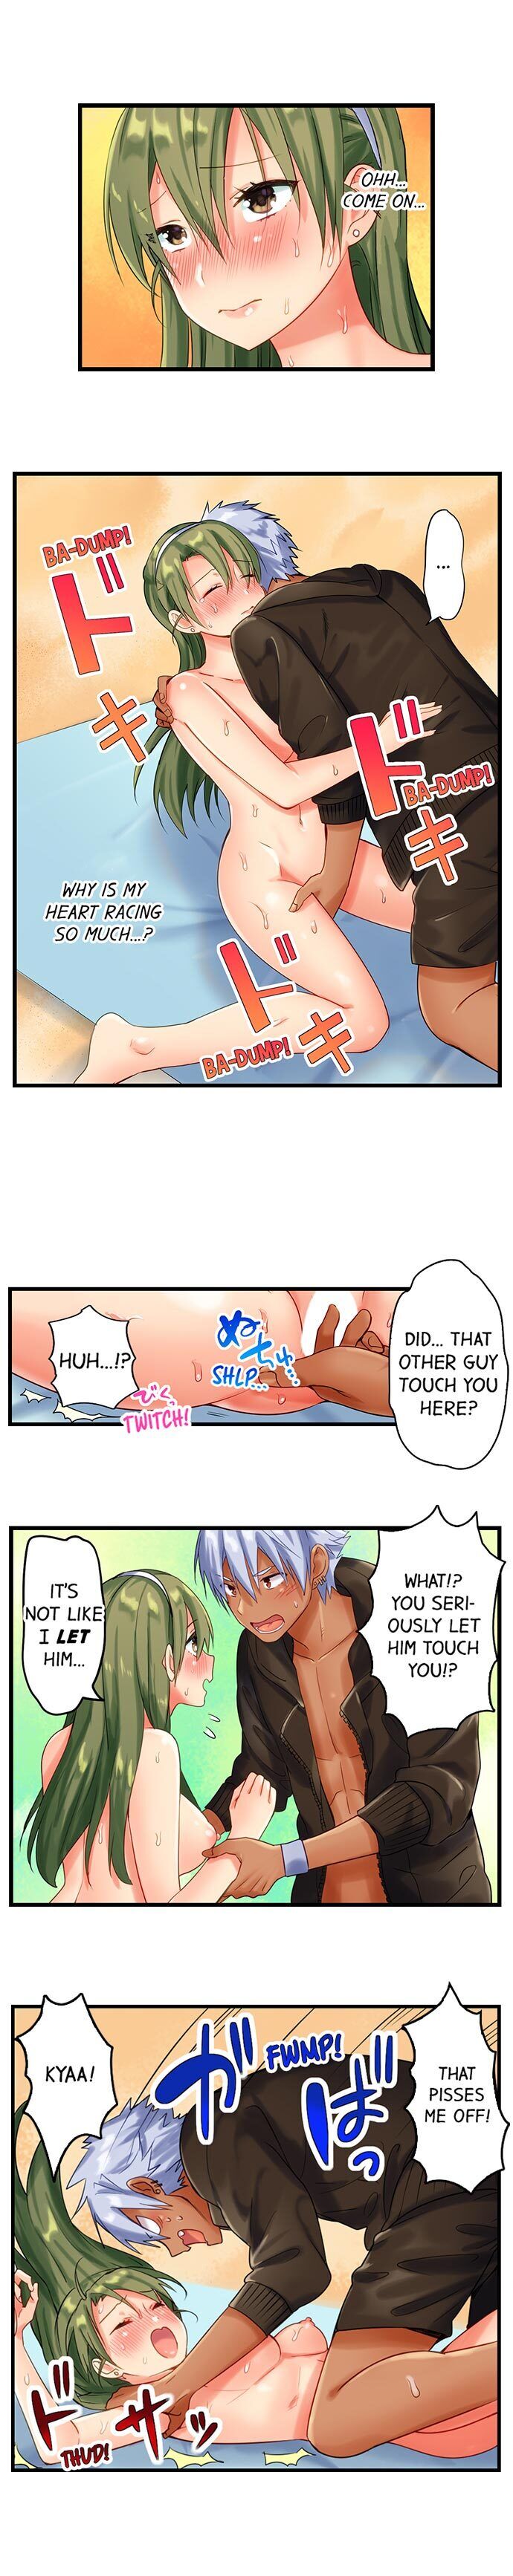 A Chaste Girl’s Climax at a Nudist Beach - Chapter 6 Page 2